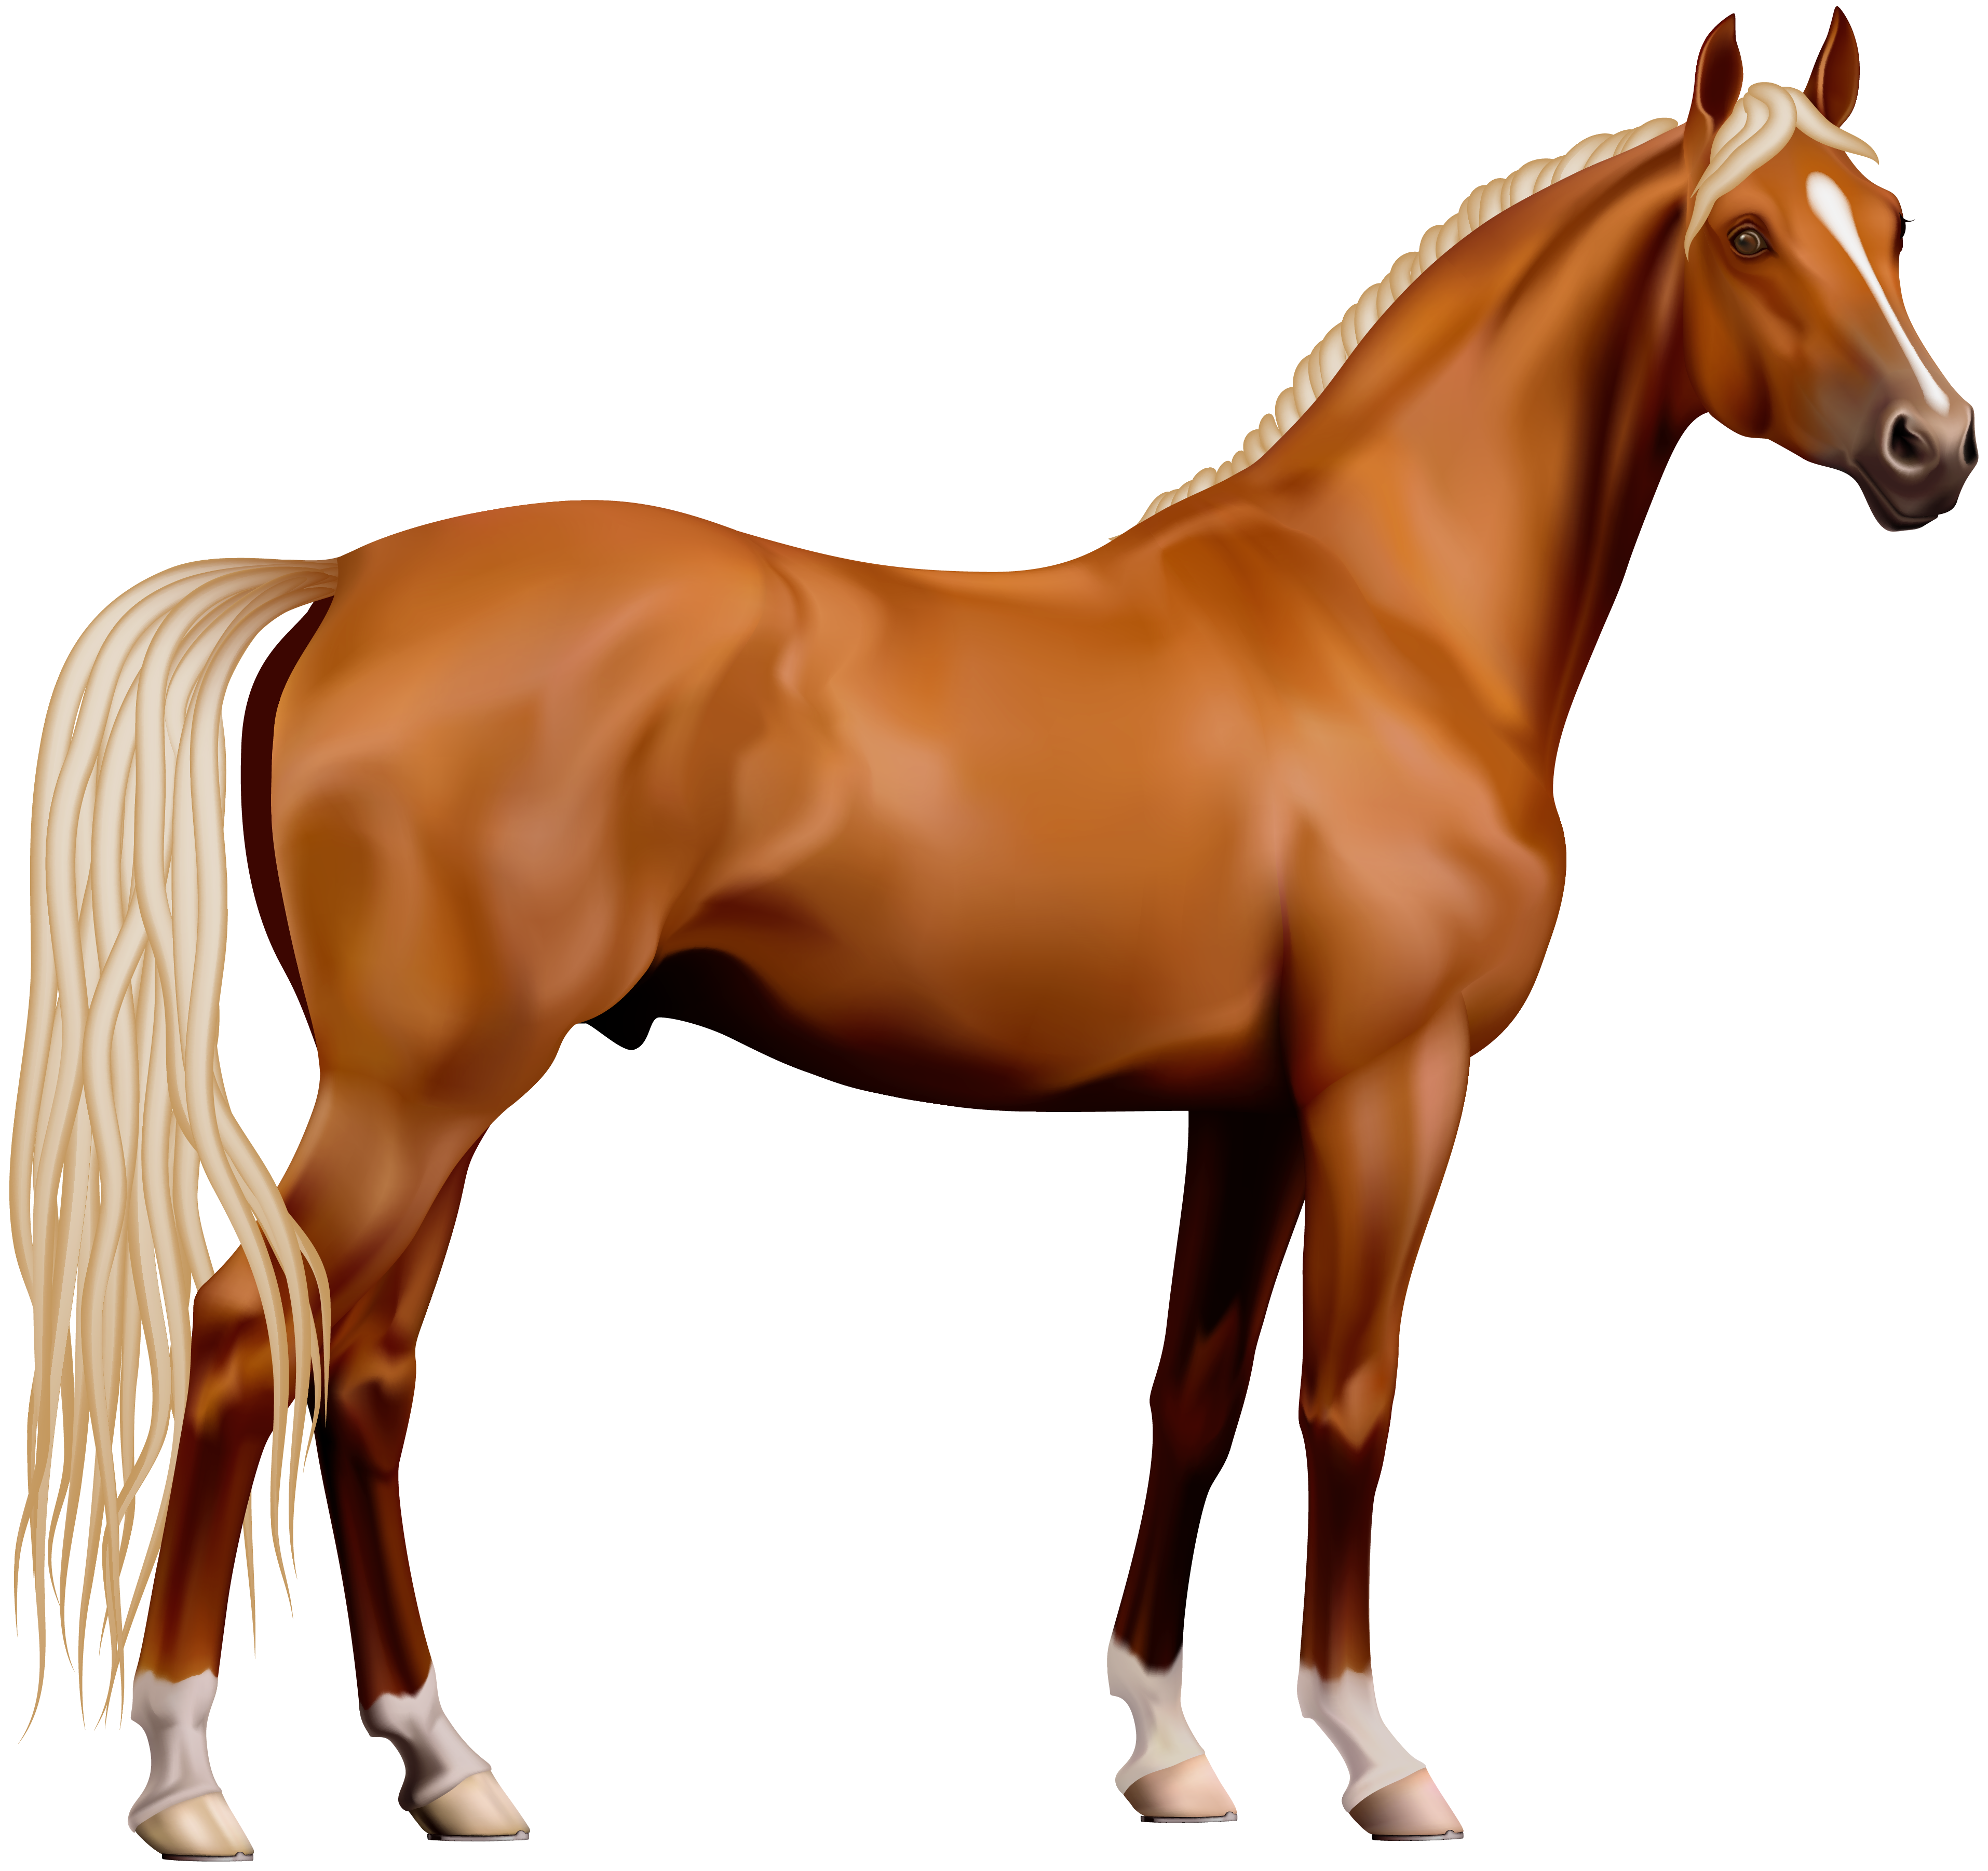 horse background clipart - photo #12